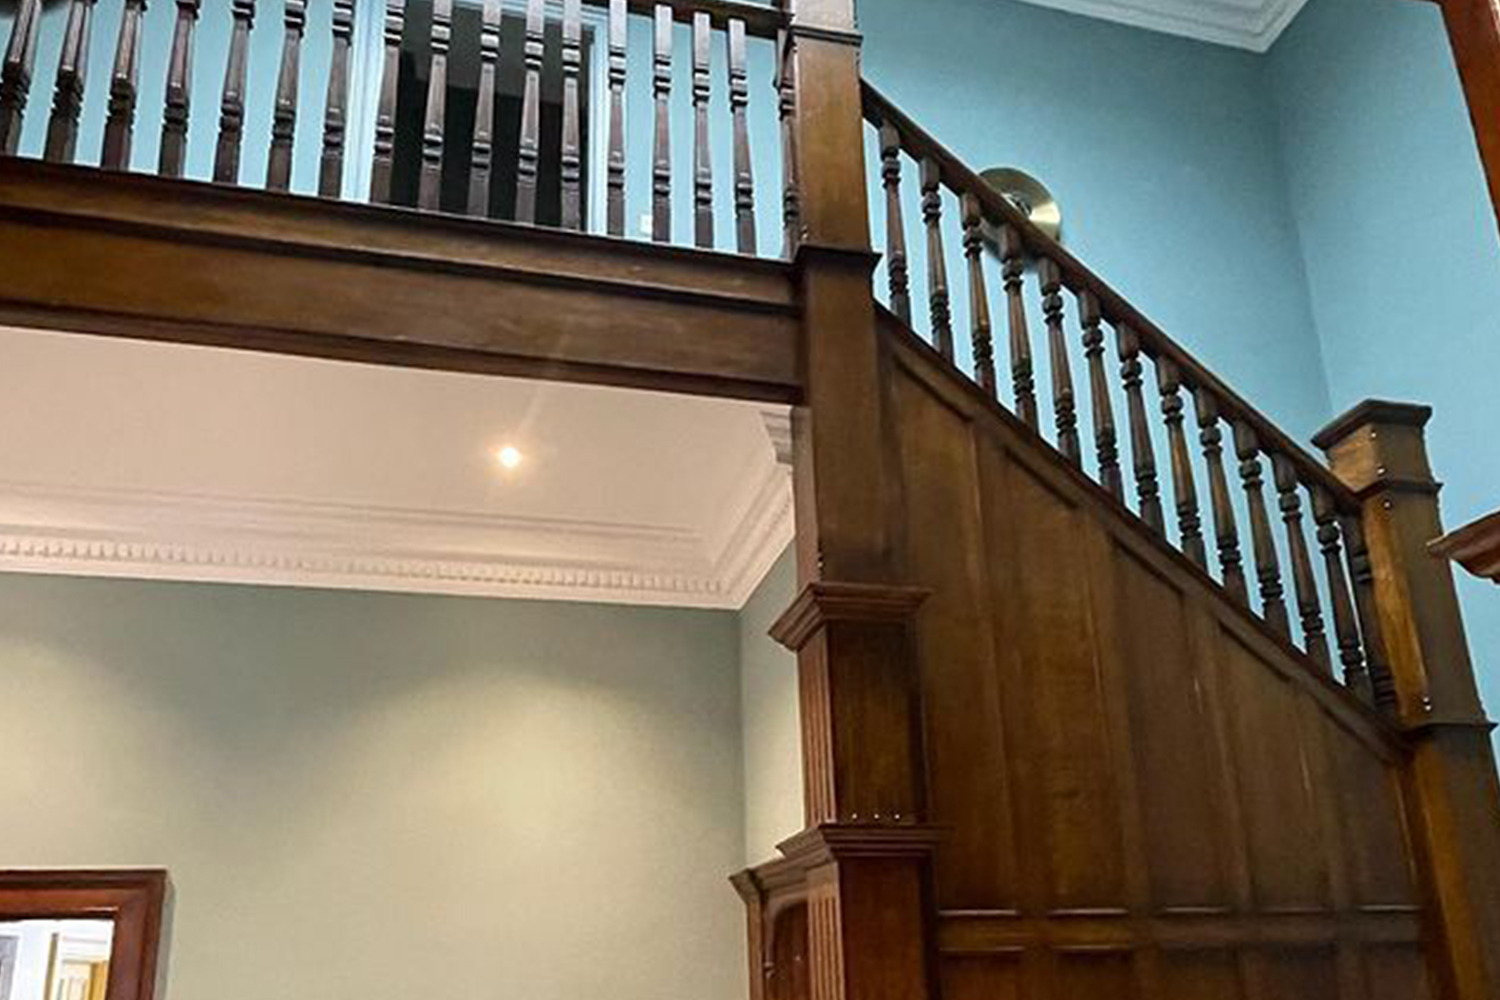 A staircase with elegant wooden banisters after polishing